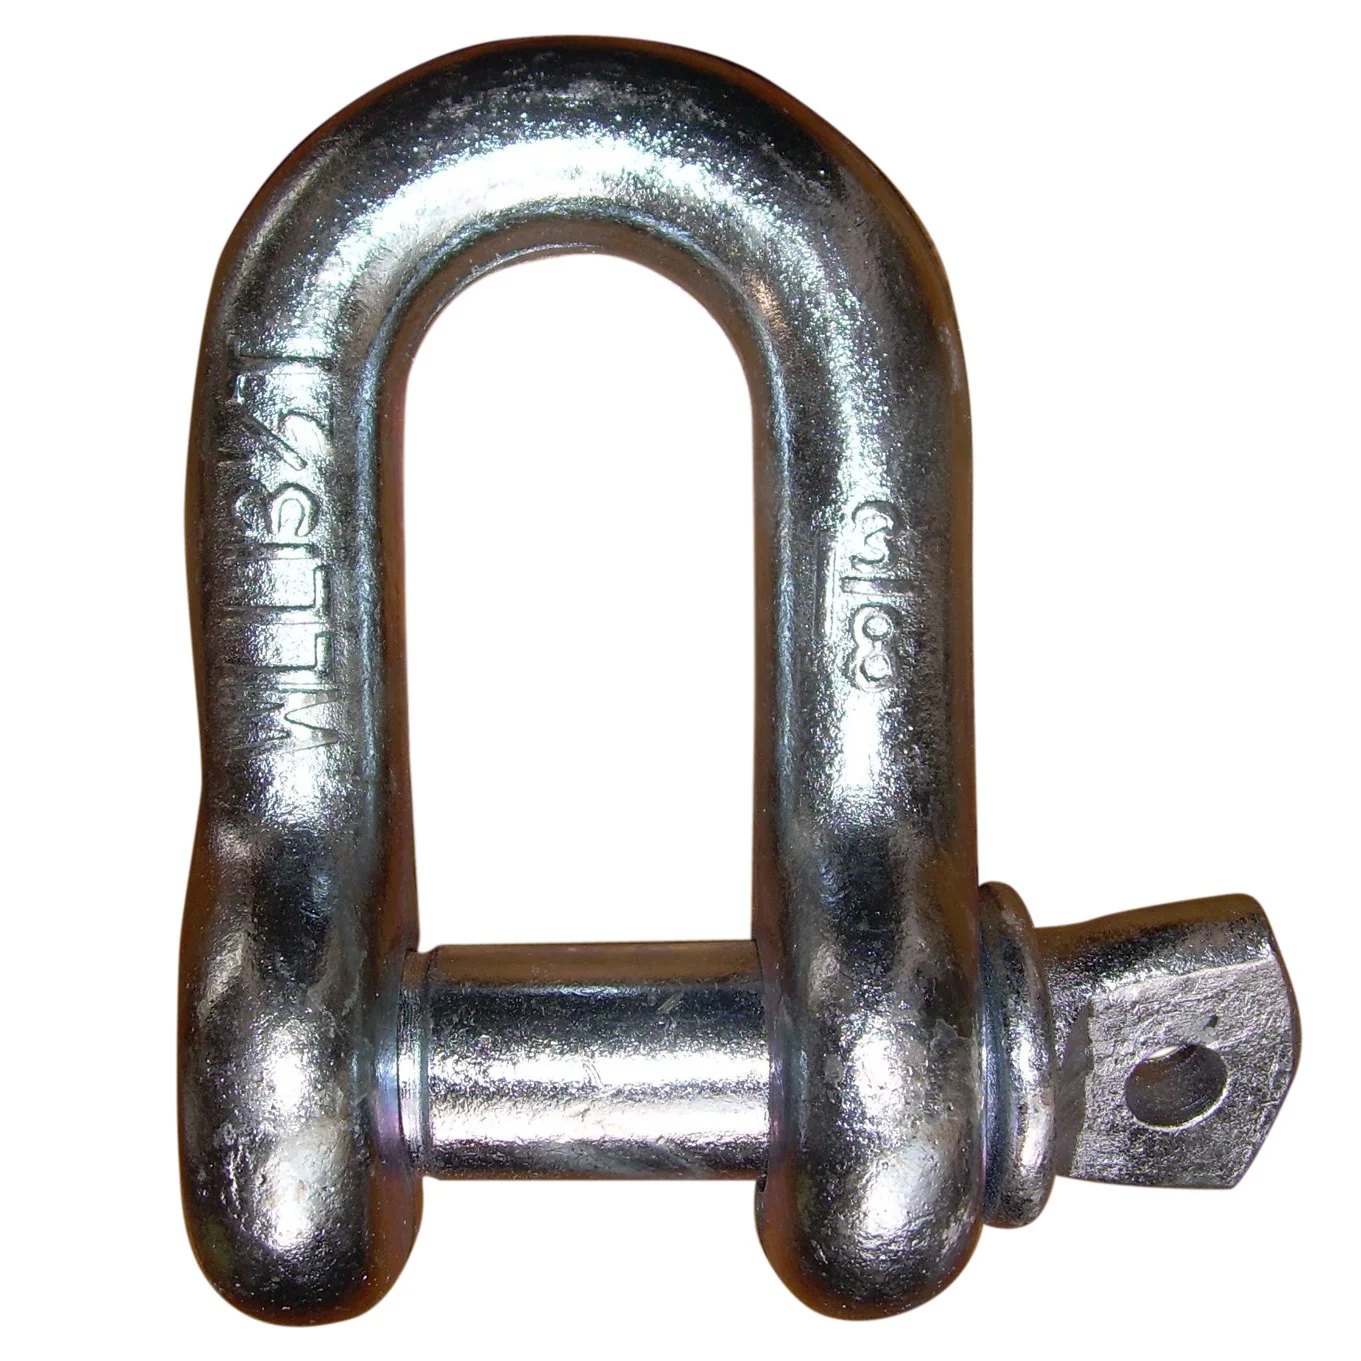 
High Strength Stainless Steel Marine Rigging Anchor Chain D Shackle Stainless Steel  (1600226998118)